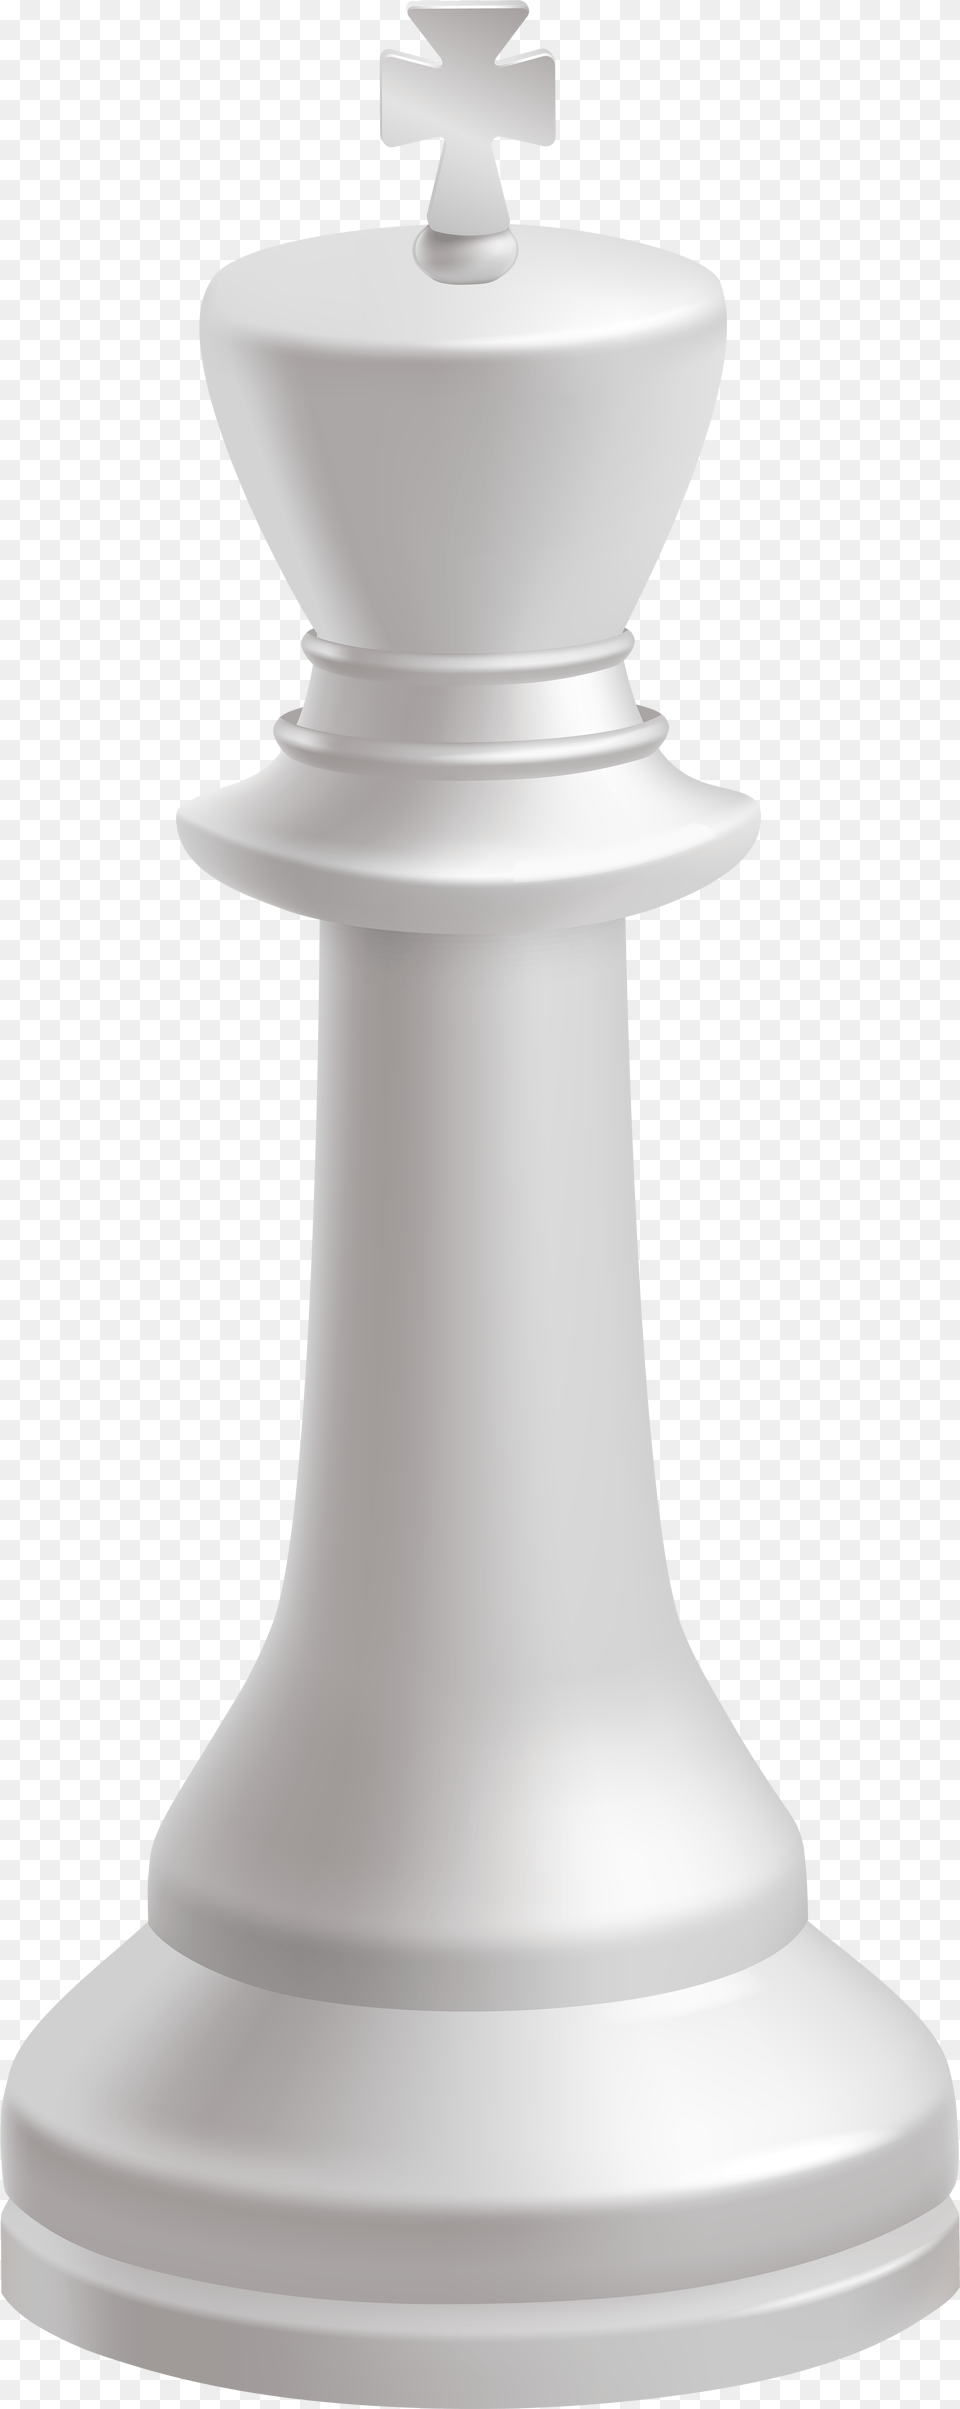 King White Chess Piece Clip Art King Chess Cake, Game Free Transparent Png